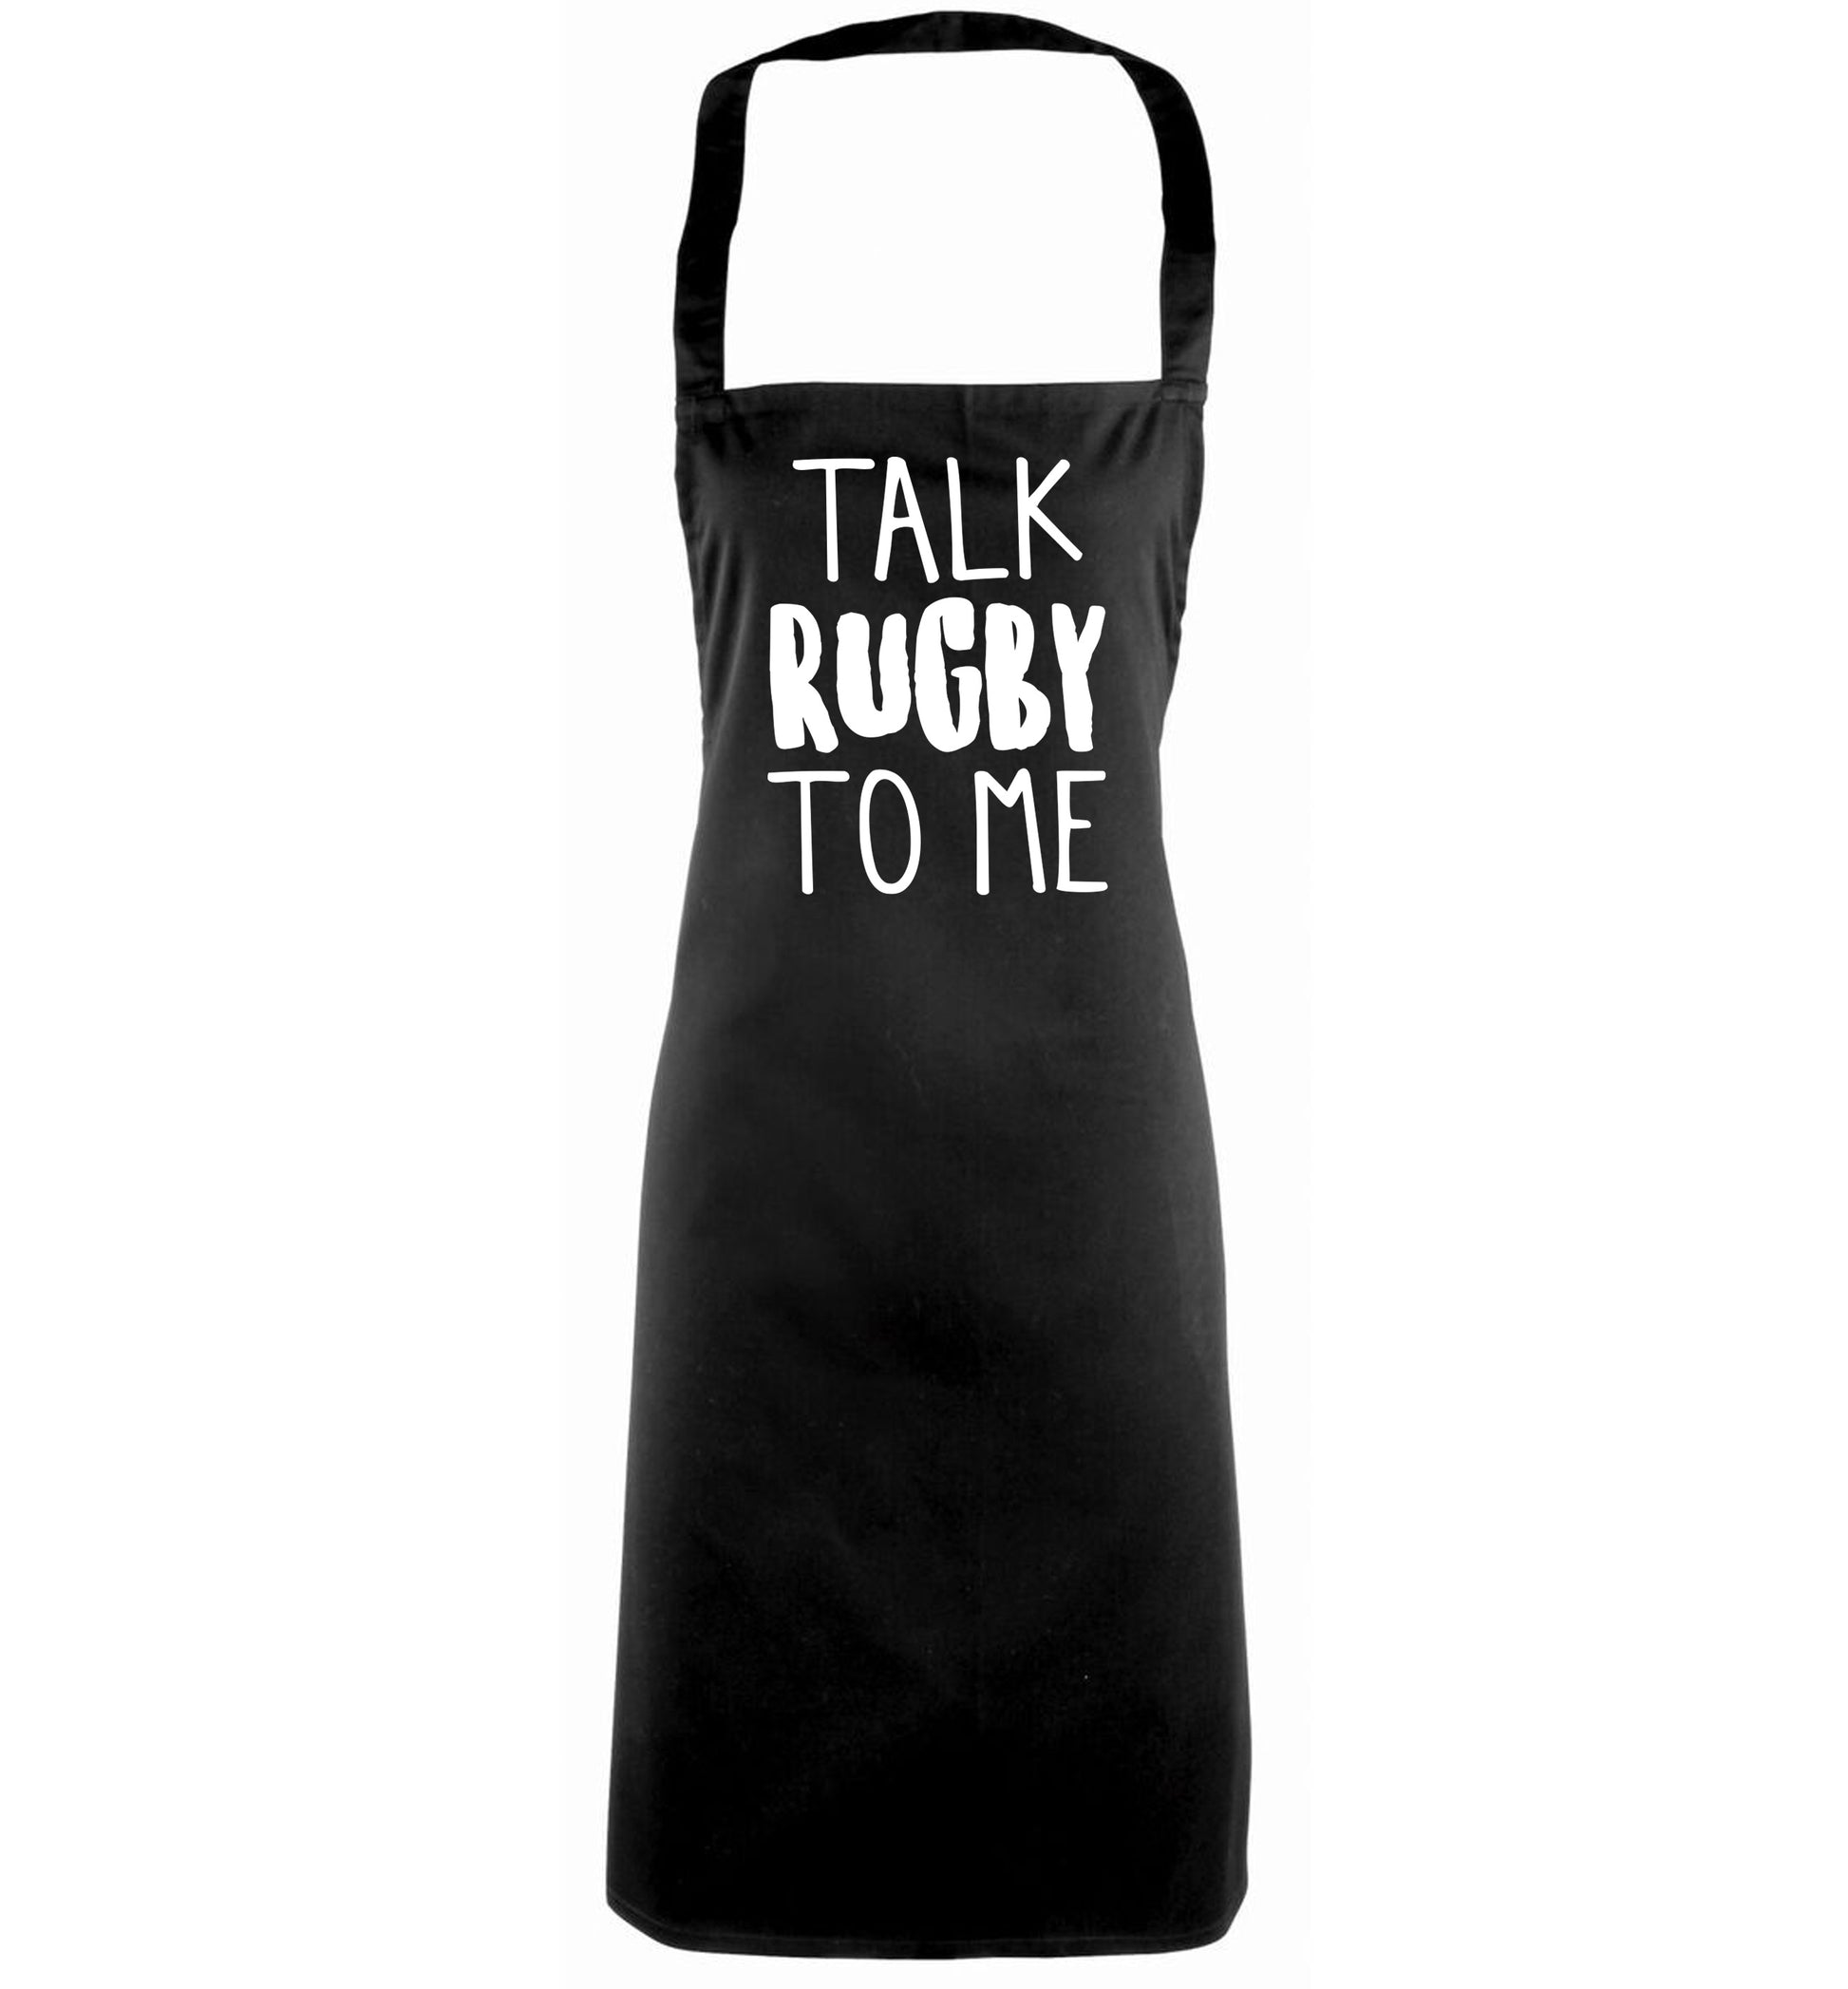 Talk rugby to me black apron